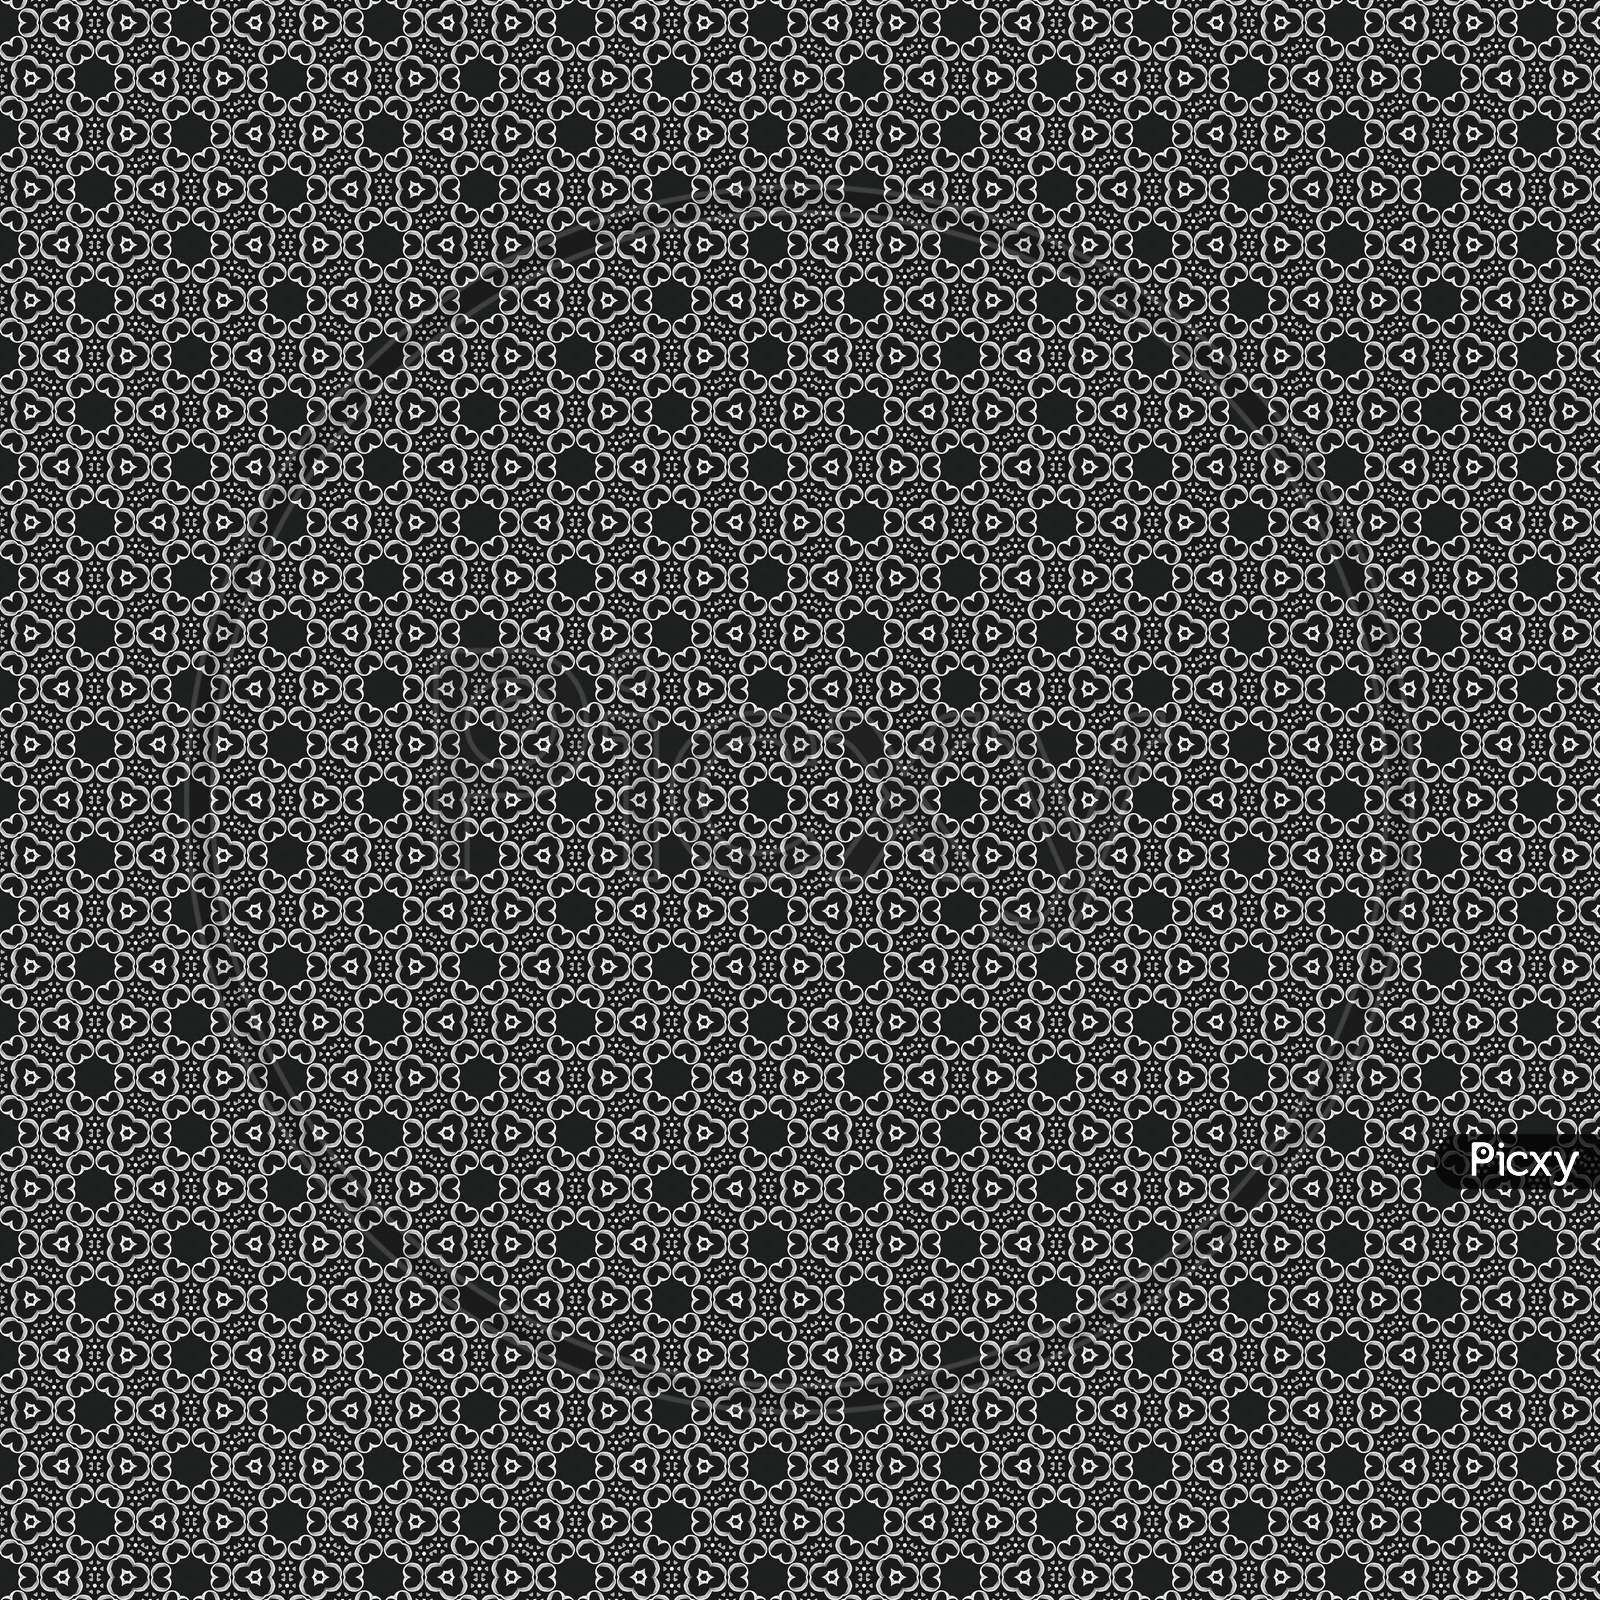 Beautiful Black And White Symmetrical Designs On Solid Sheet Of Wallpaper. Concept Of Home Decor And Interior Designing